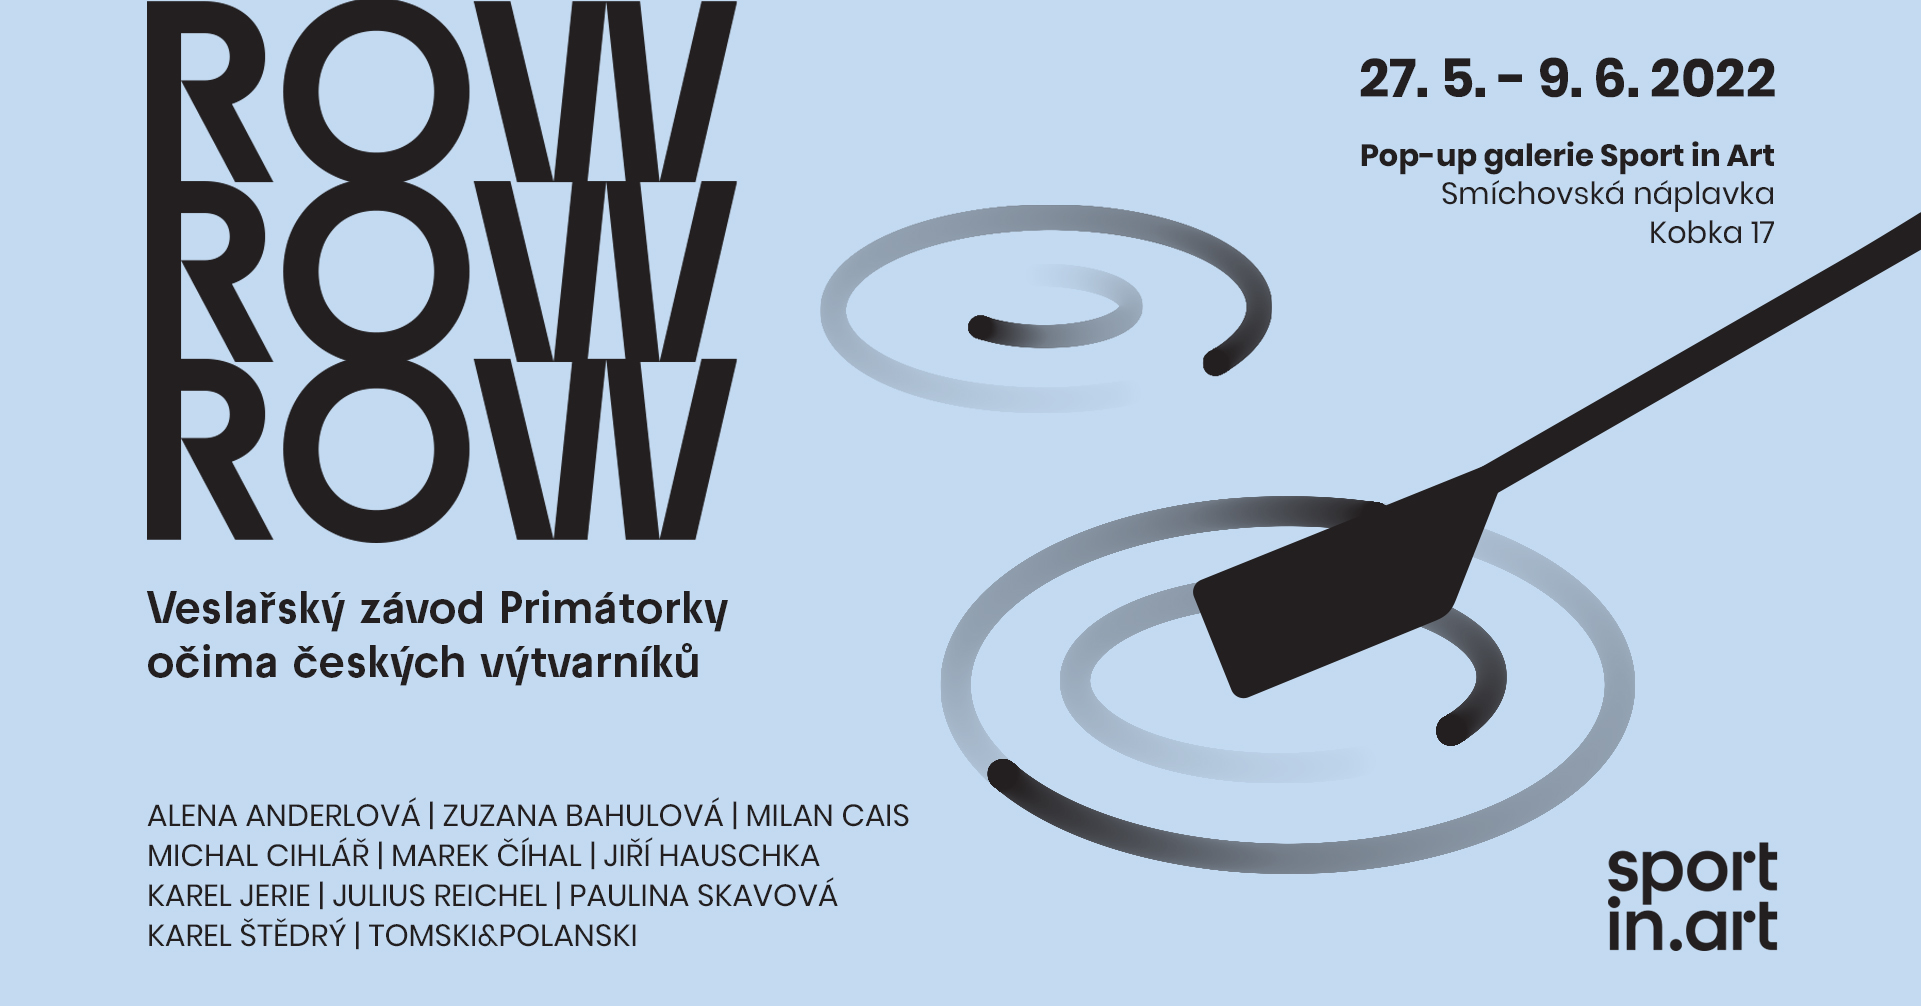 Graphic visual for the exhibition ROW ROW ROW by Anna Leschingerová